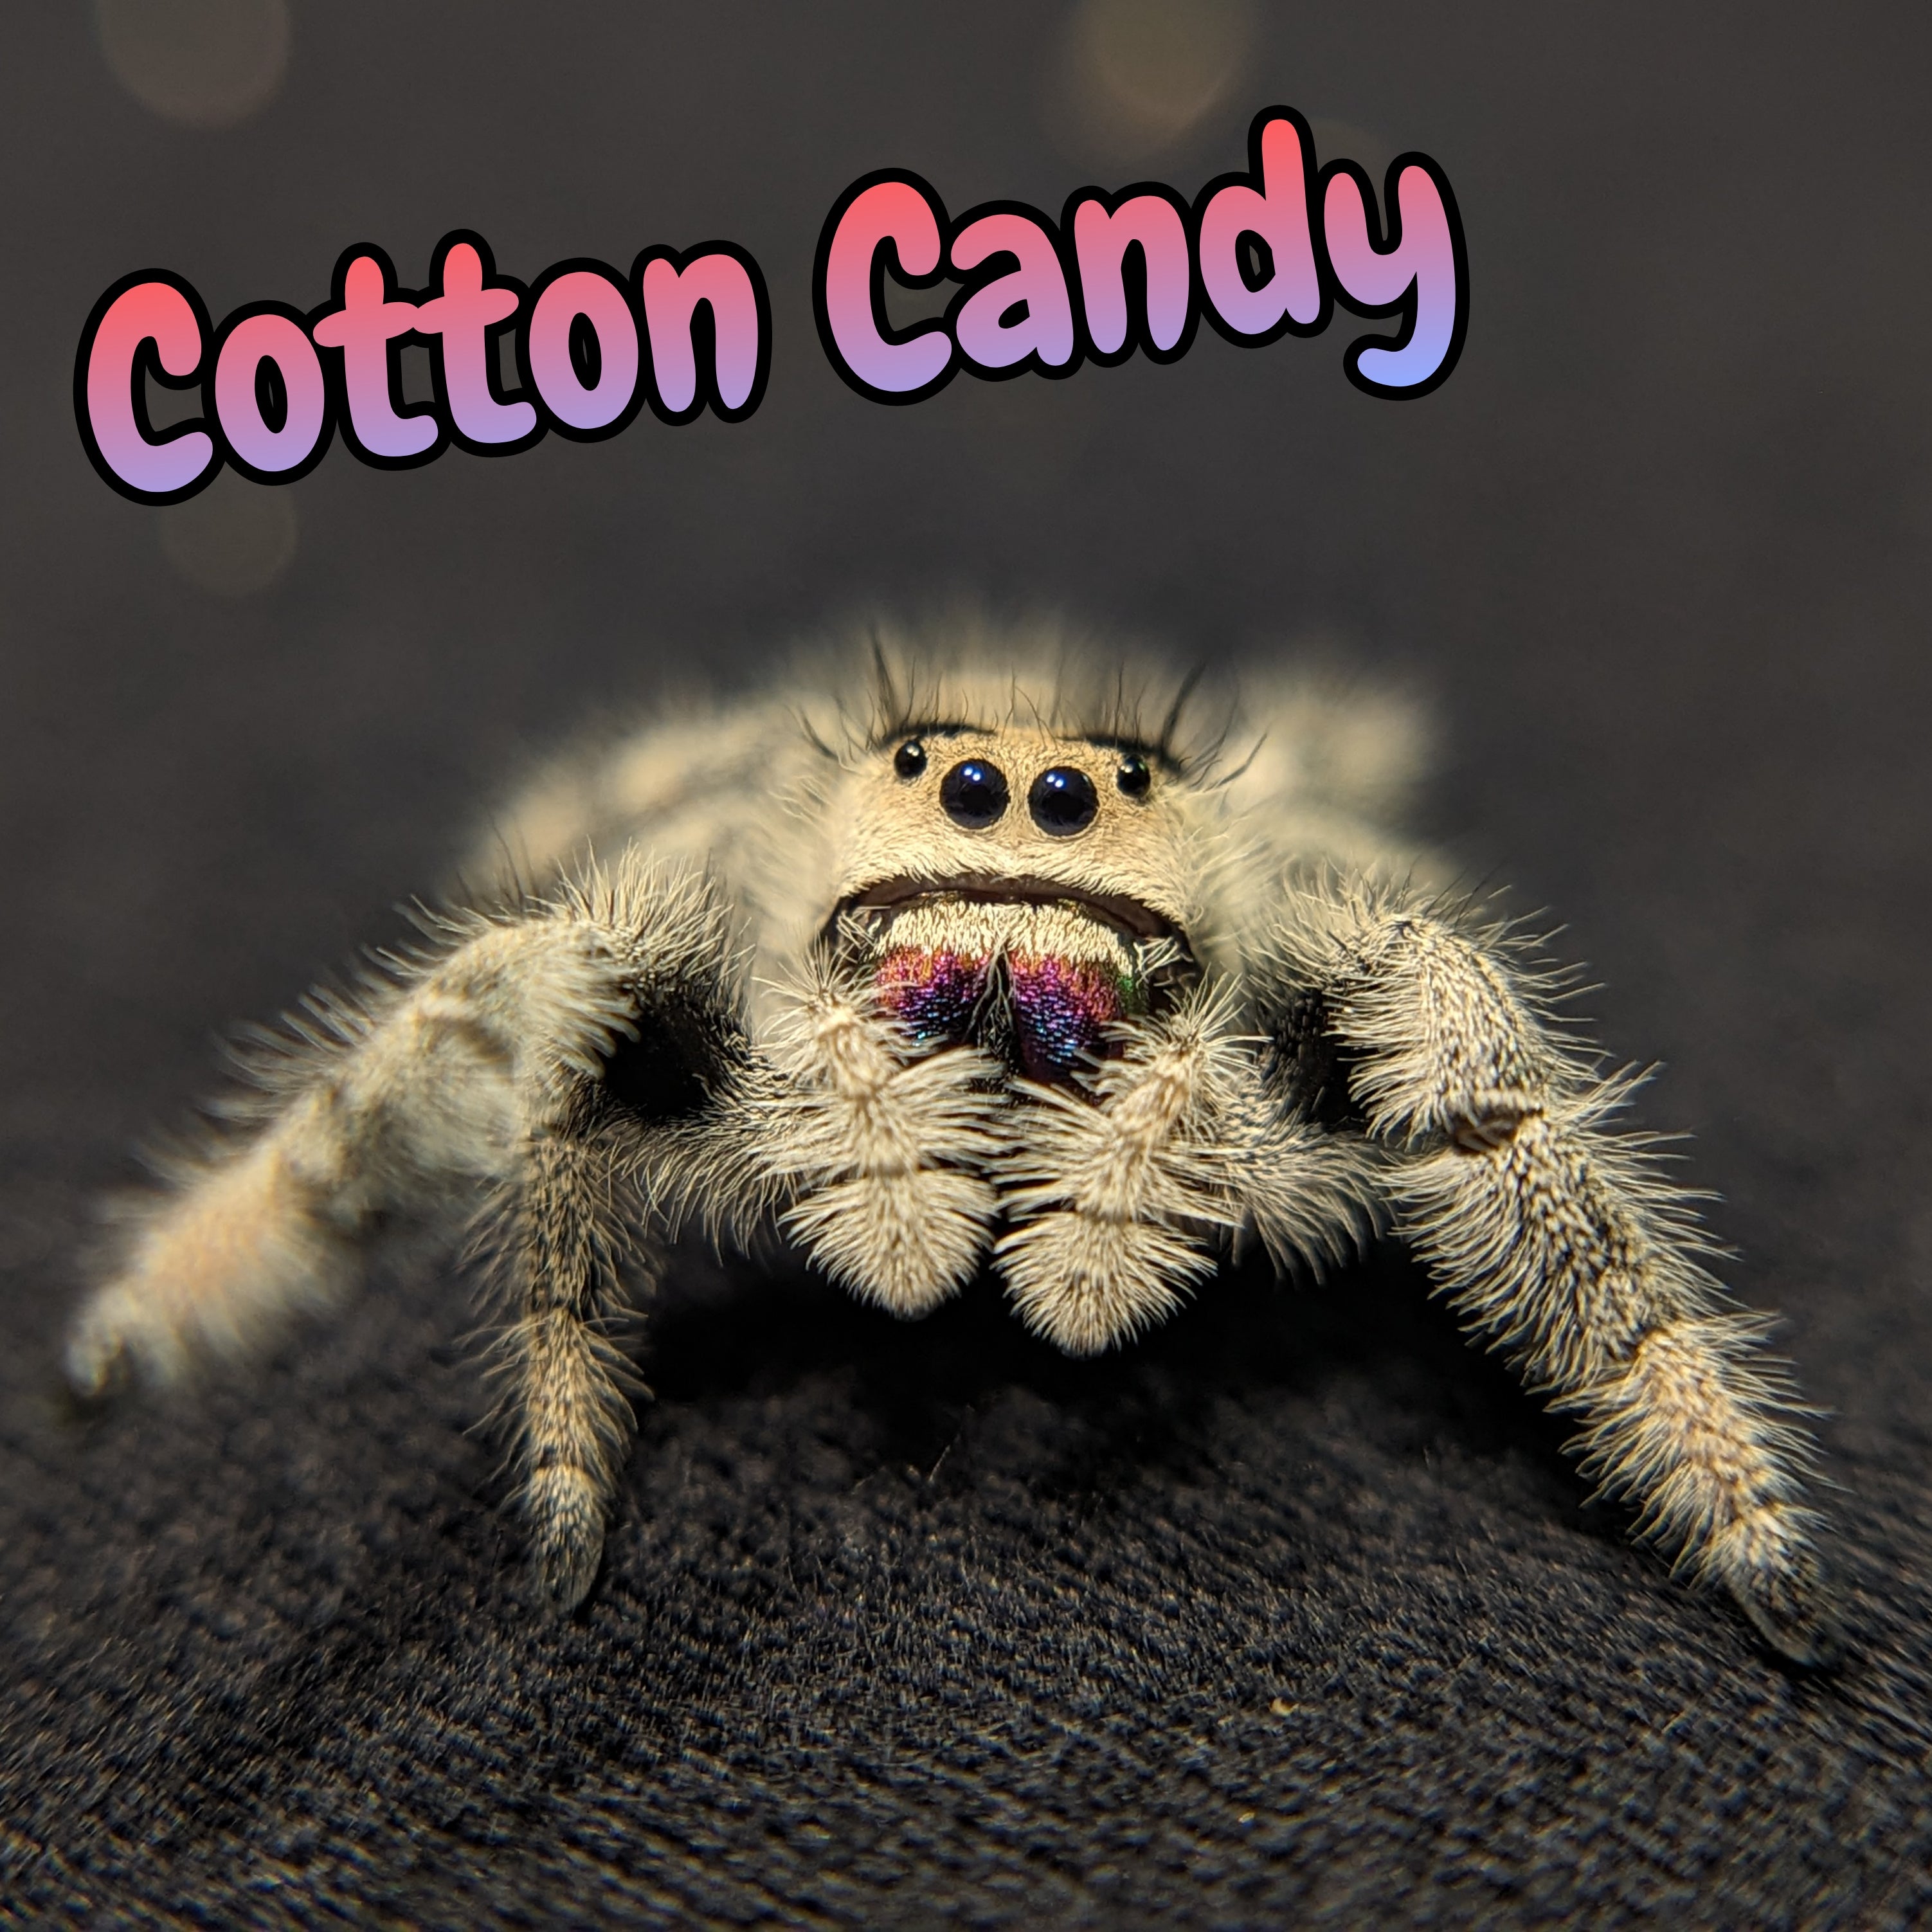 Apalachicola Regal Jumping Spider "Cotton Candy" (Rare)